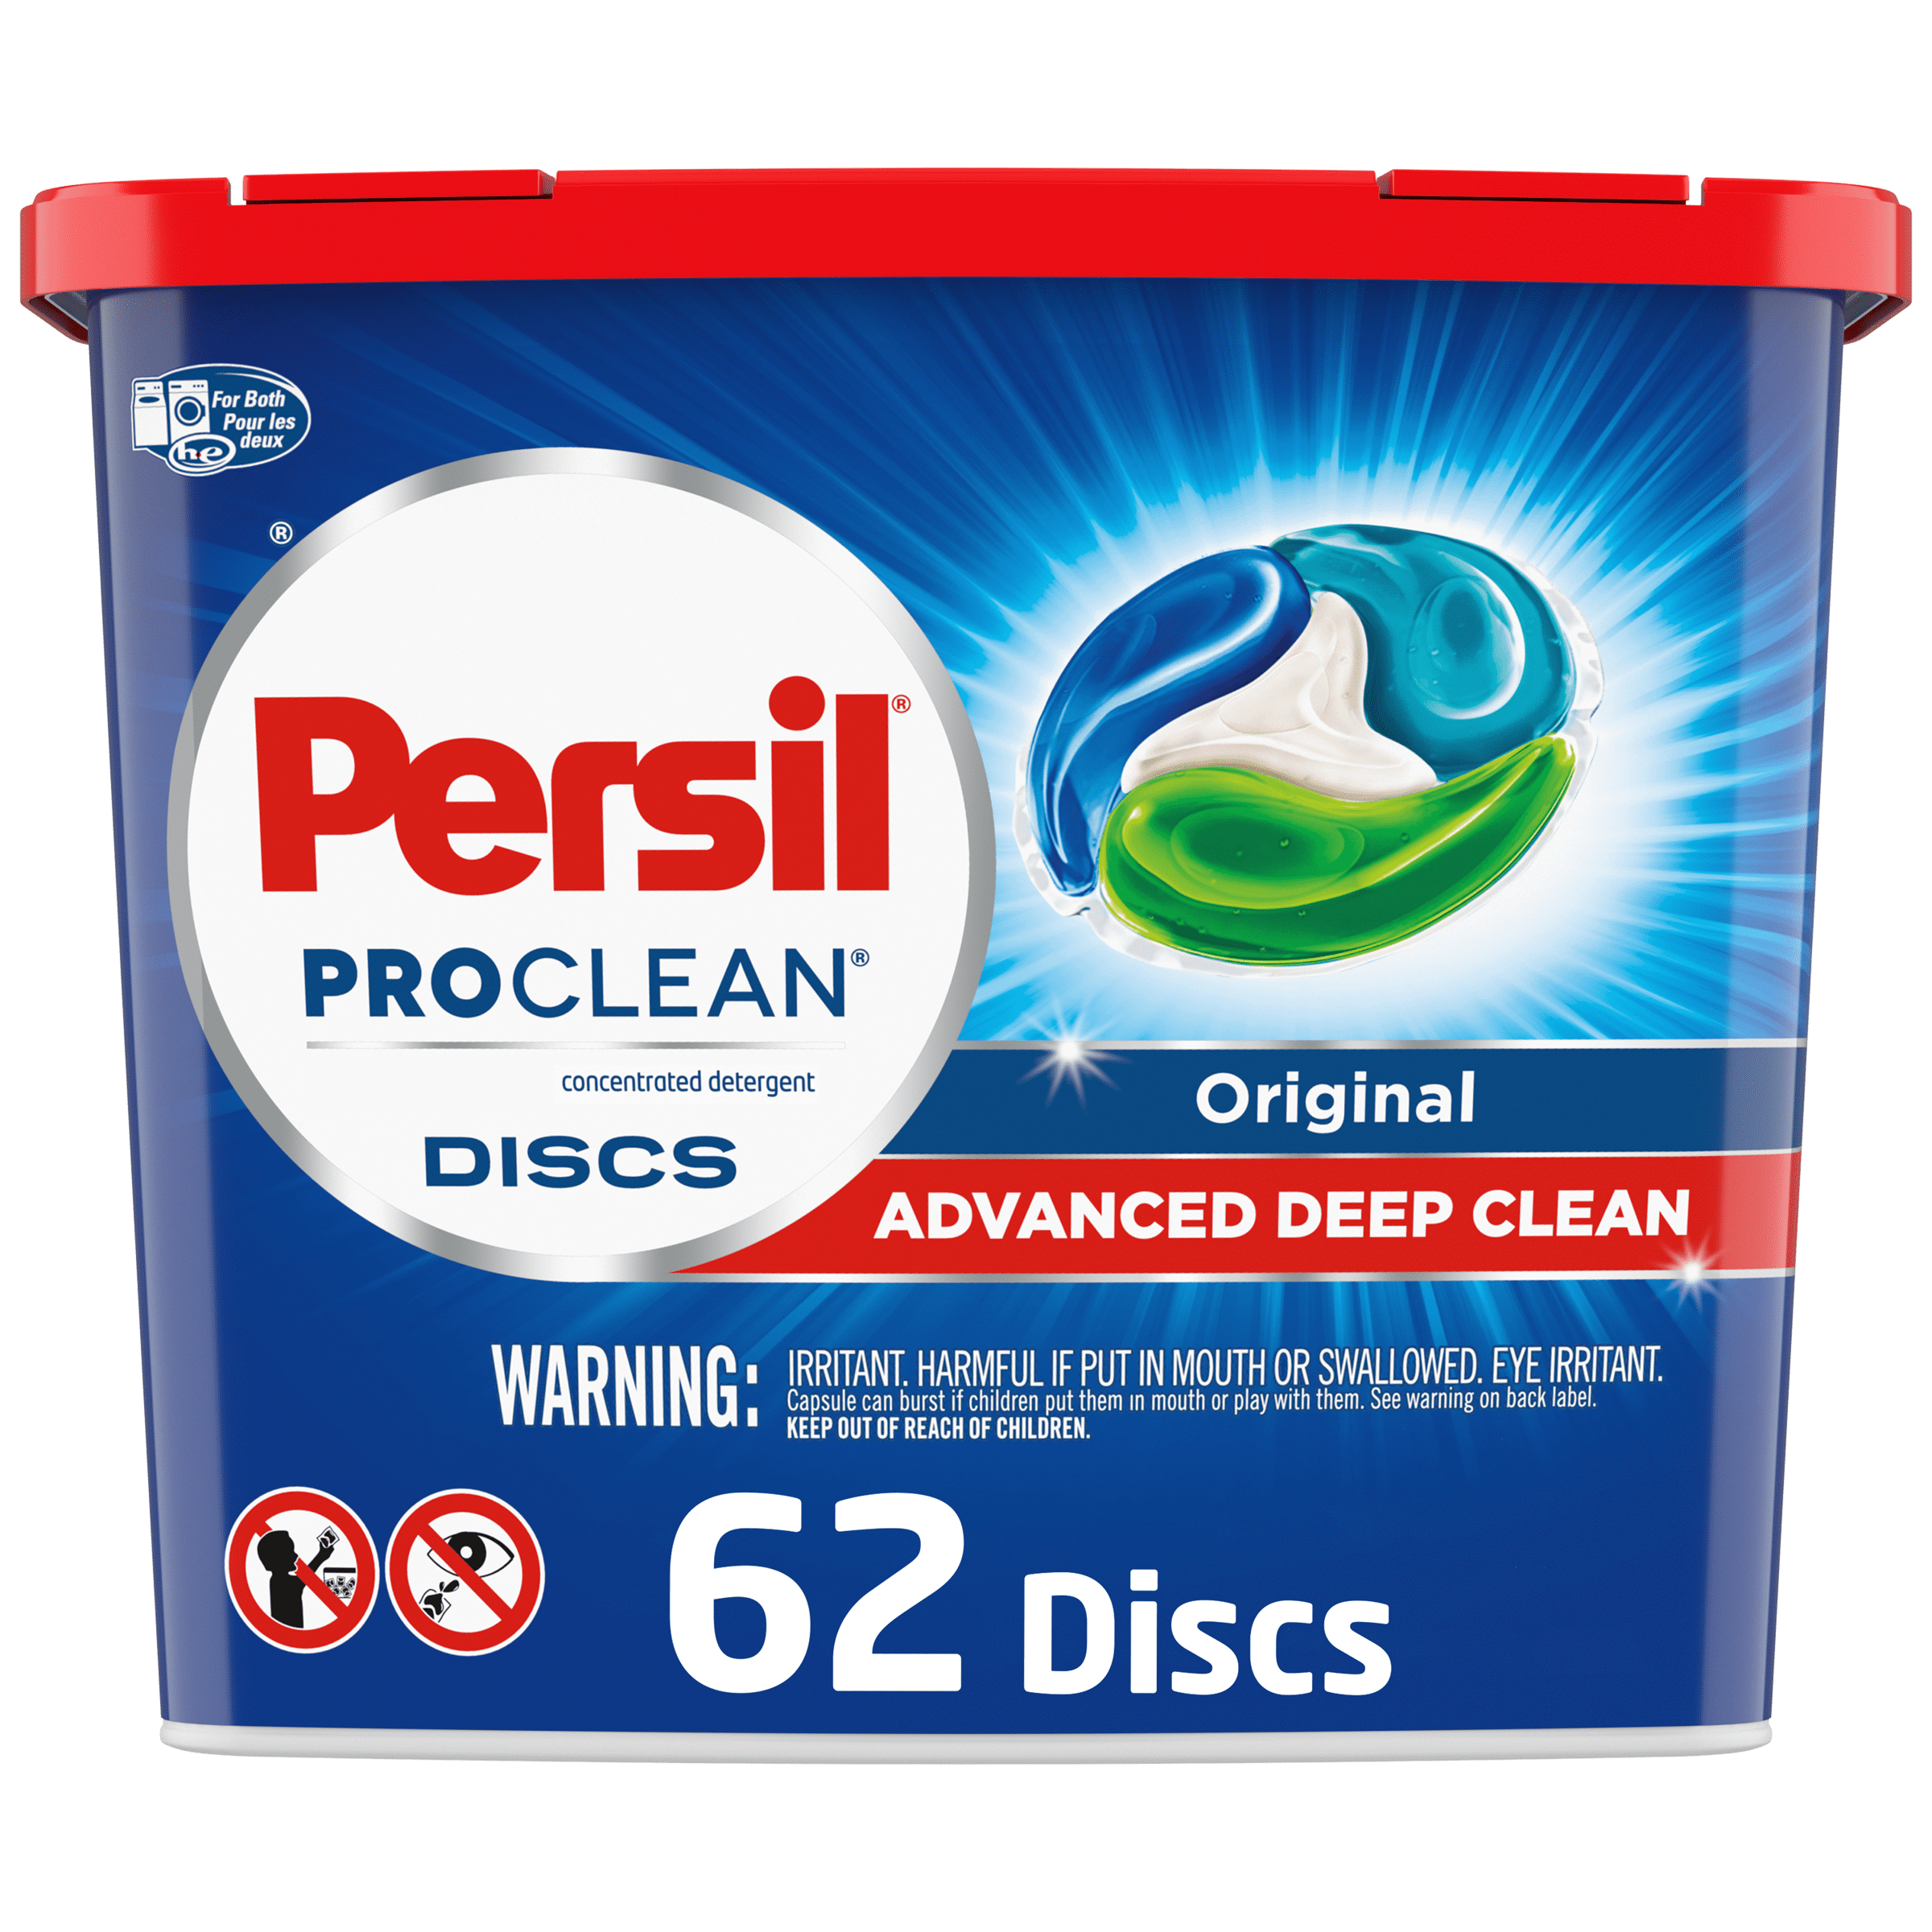 P&S Professional Detail Products - Rags to Riches - Premium Microfiber  Detergent, Deep Cleans and Restores, Safe on All Fabrics, Highly  Concentrated, Next Generation Cleaning Technology (1 Quart) 